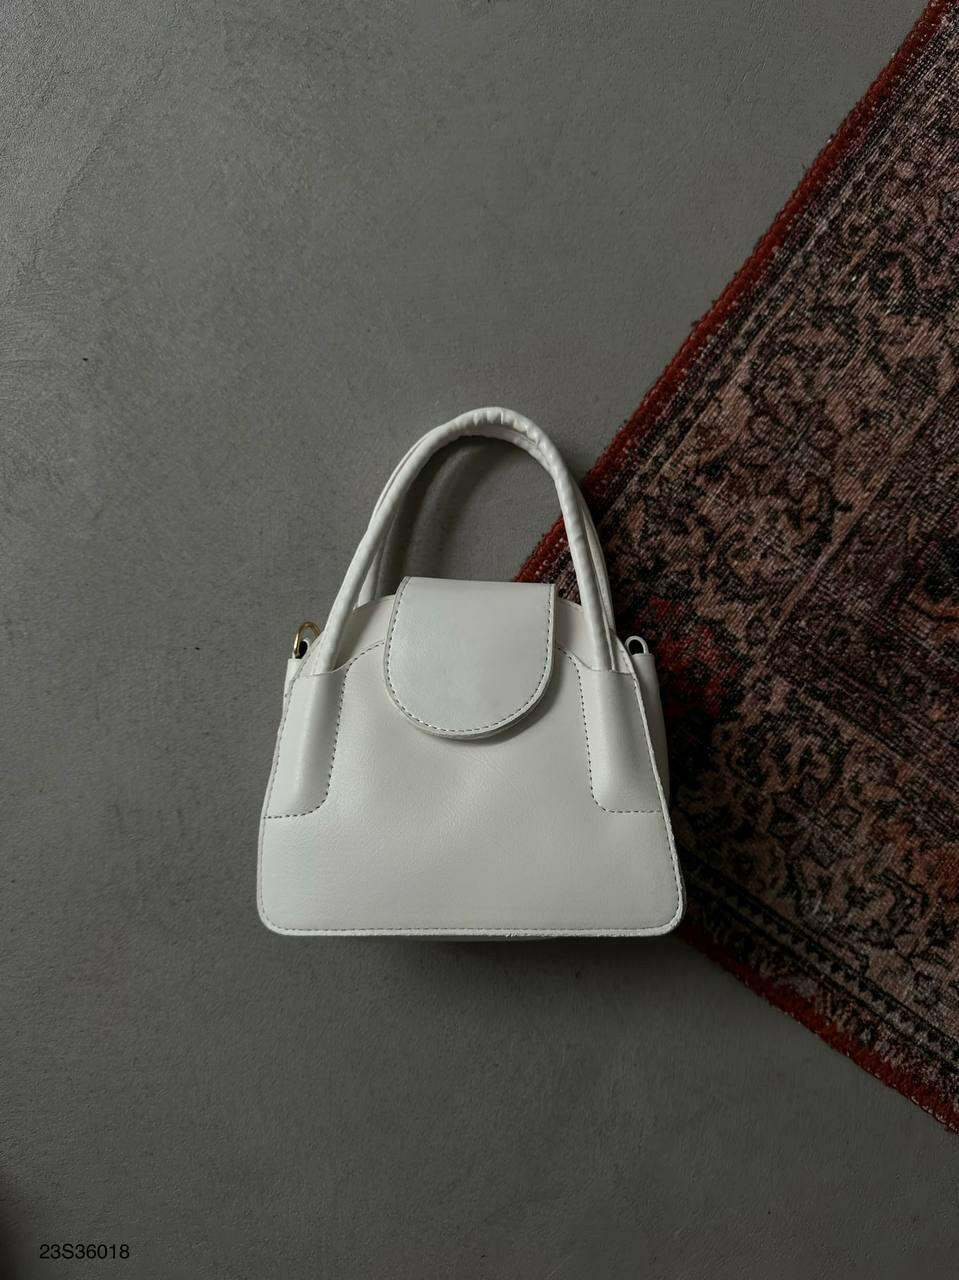 Clamshell Style Daily Bag in White - Noxlook